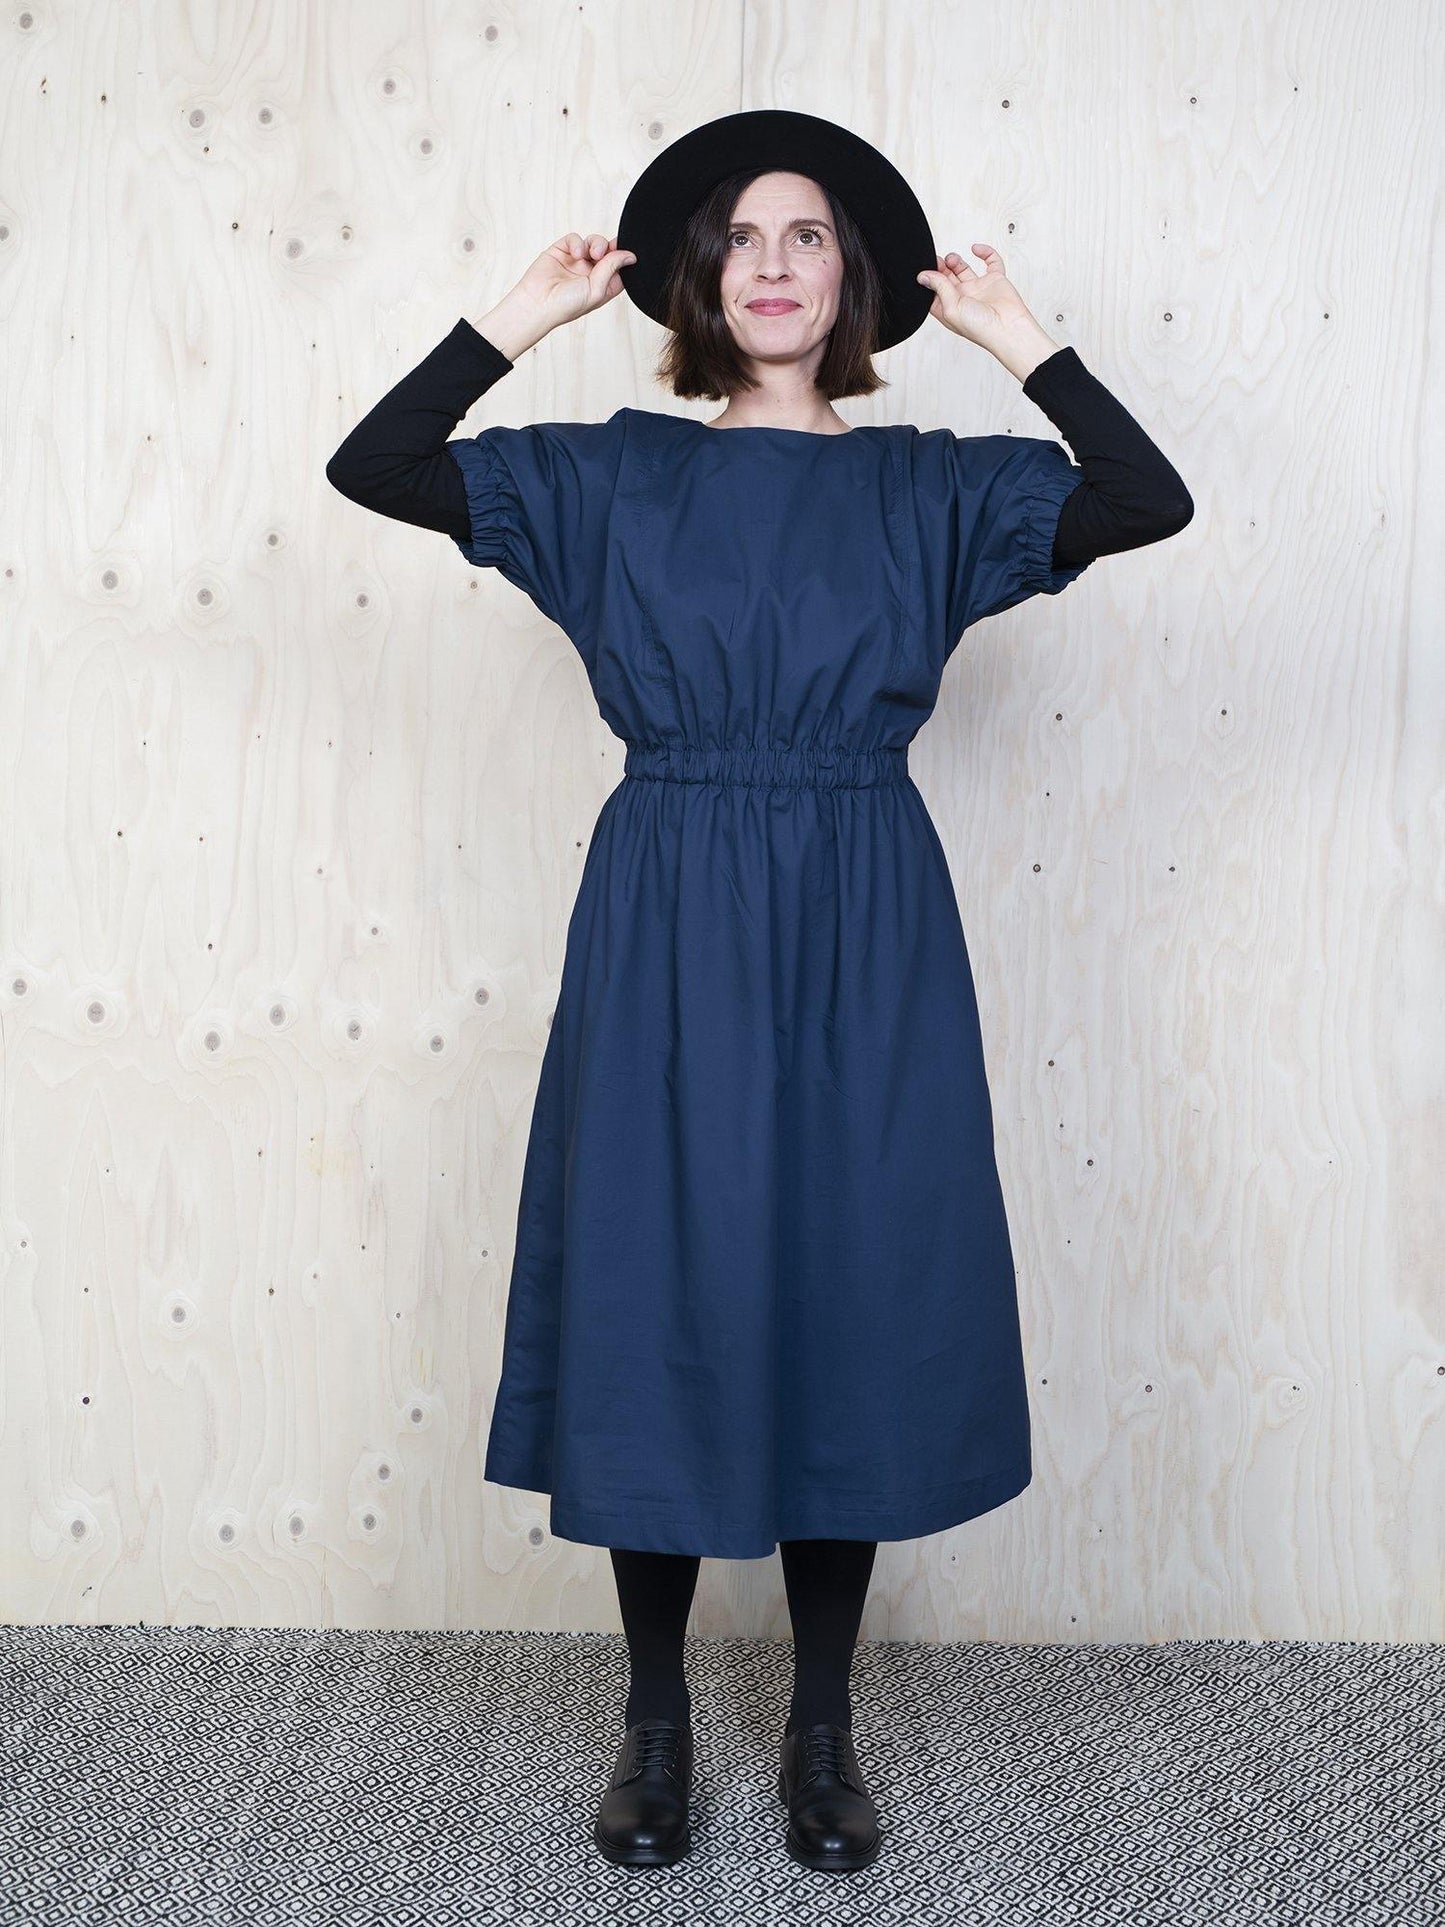 Cuff Dress sewing pattern by The Assembly Line